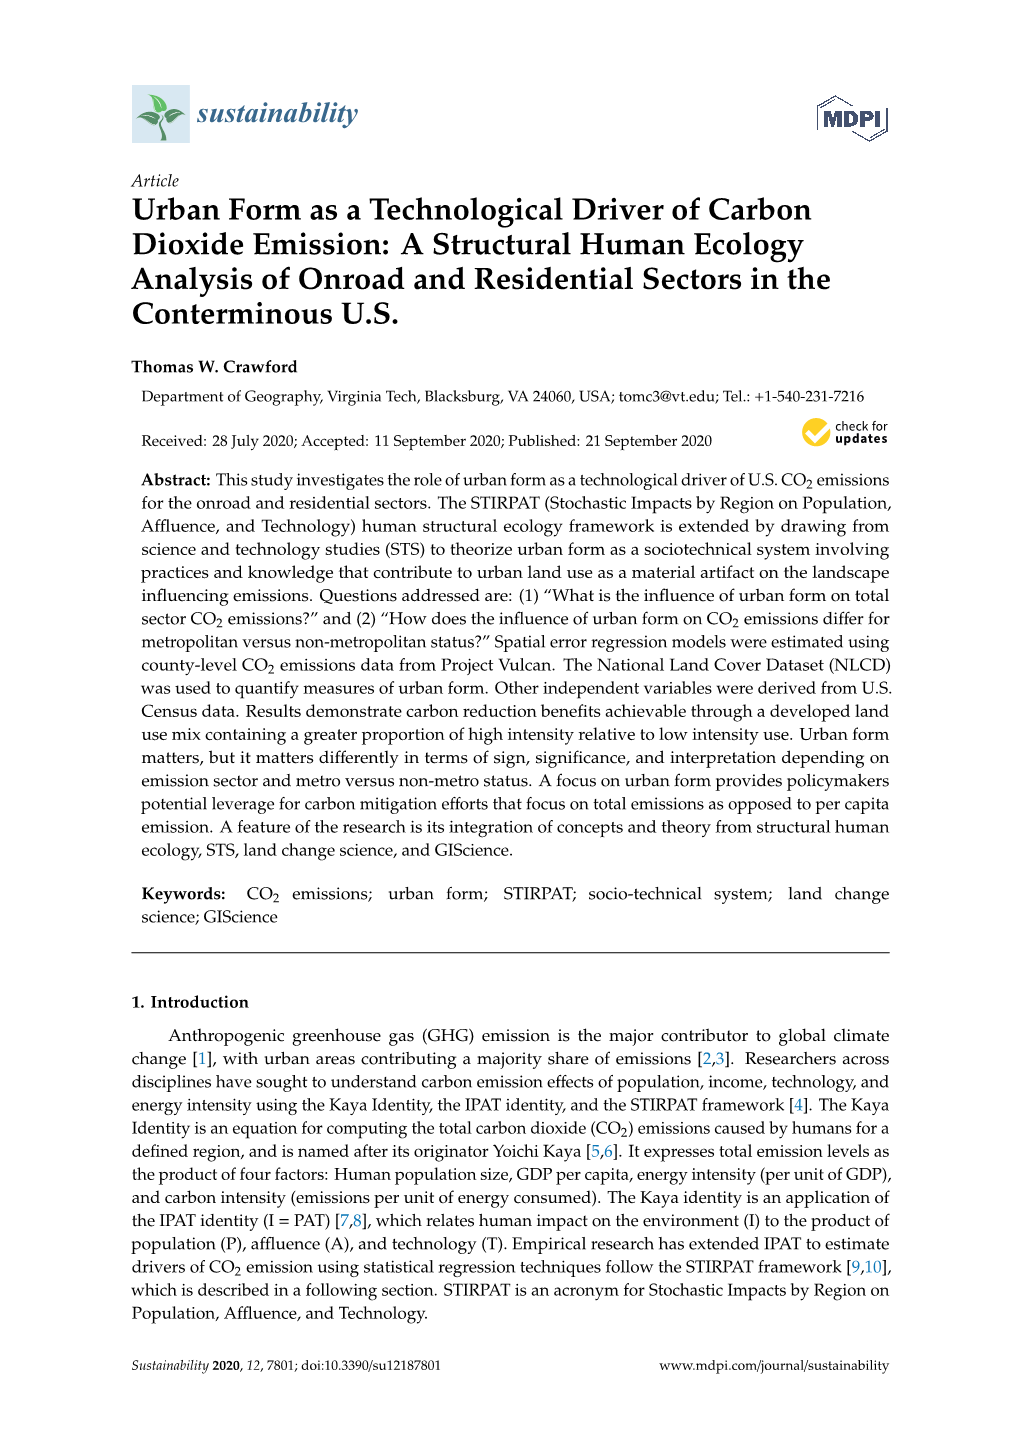 Urban Form As a Technological Driver of Carbon Dioxide Emission: a Structural Human Ecology Analysis of Onroad and Residential Sectors in the Conterminous U.S